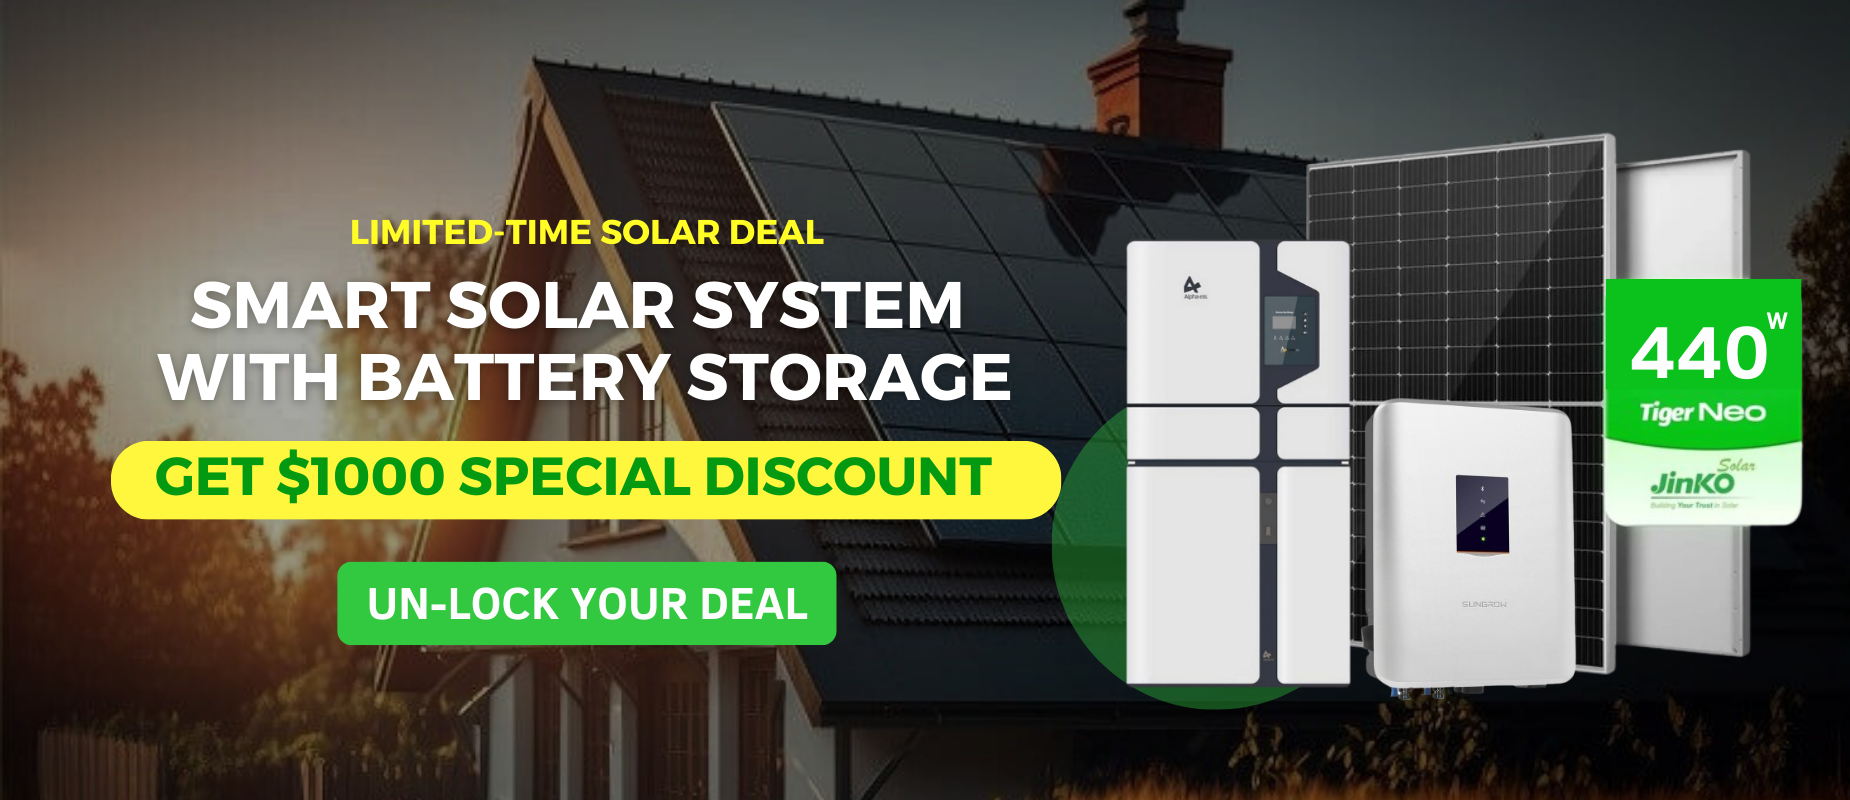 Ozeal Eacnergy - solar panel services, solar installation company and sales company in Sydney NSW - Australia